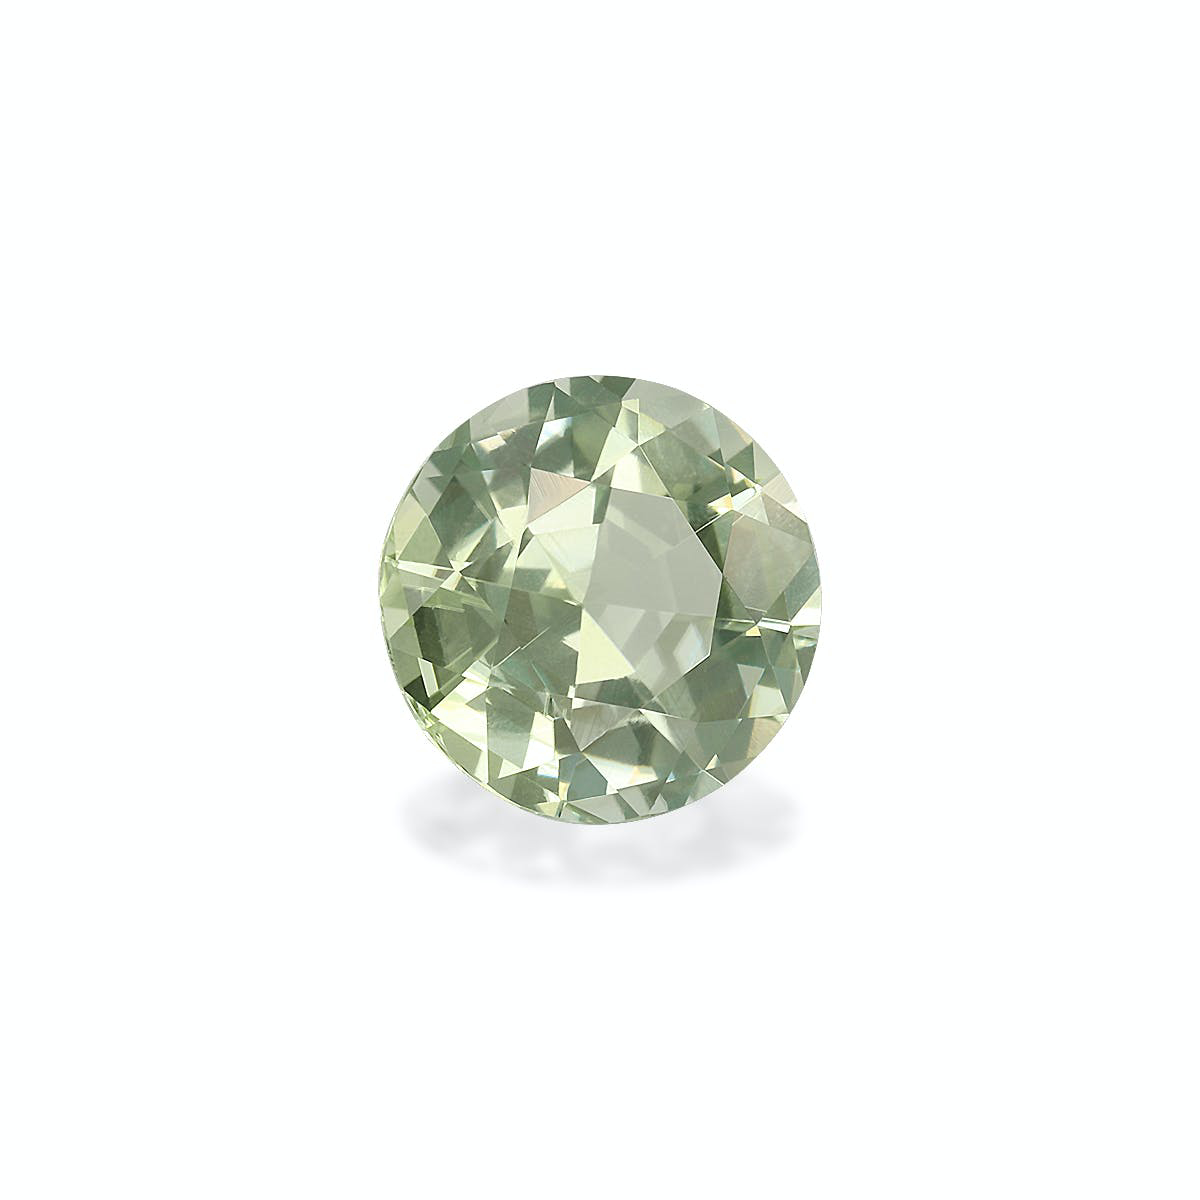 Picture of Mist Green Tourmaline 2.69ct - 9mm (TG1553)